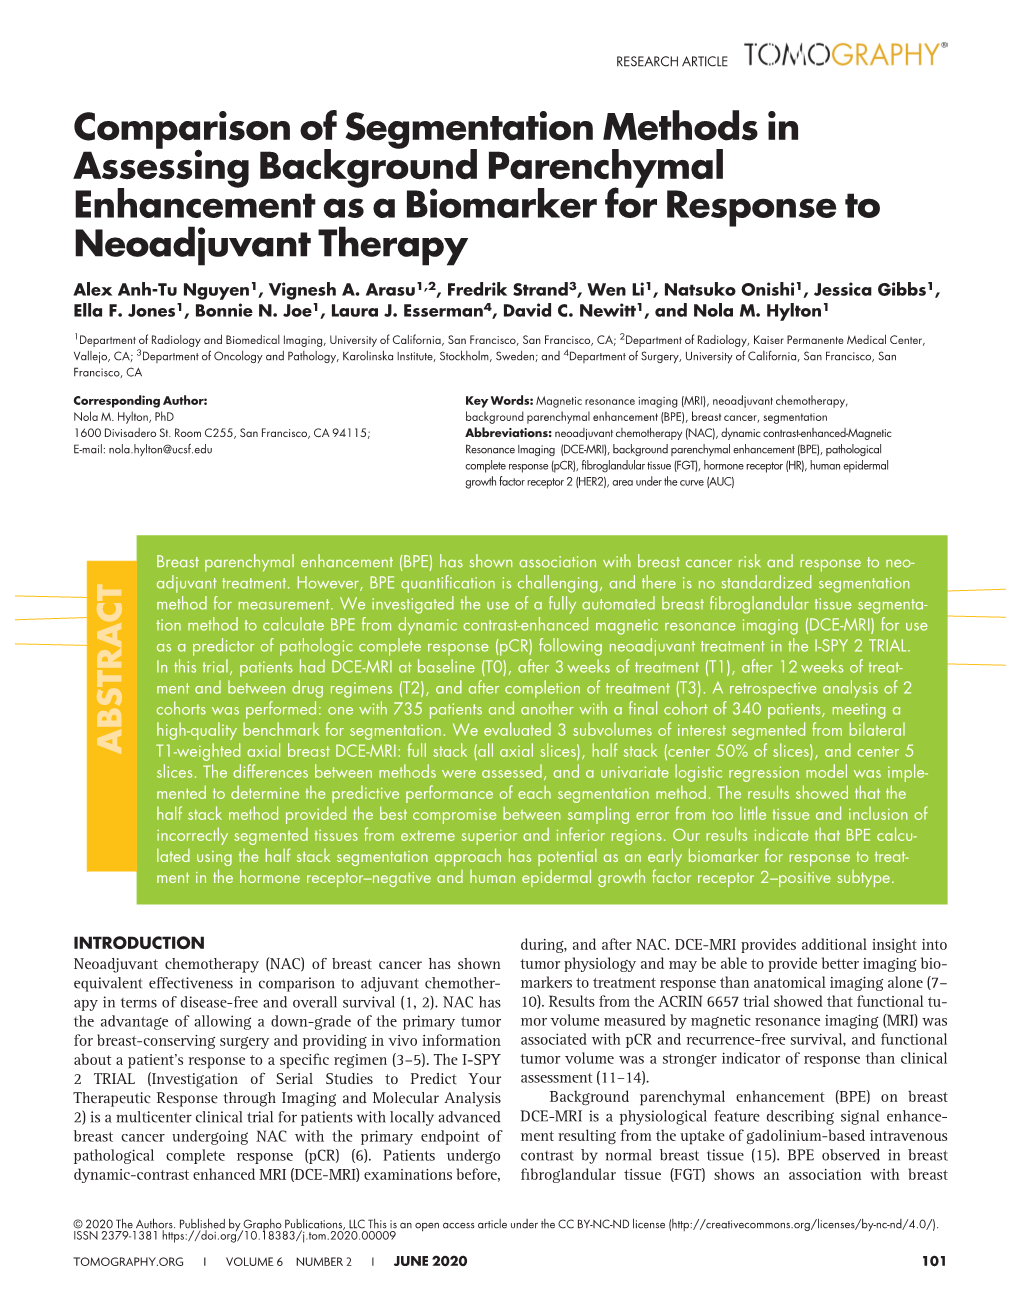 Comparison of Segmentation Methods in Assessing Background Parenchymal Enhancement As a Biomarker for Response to Neoadjuvant Therapy